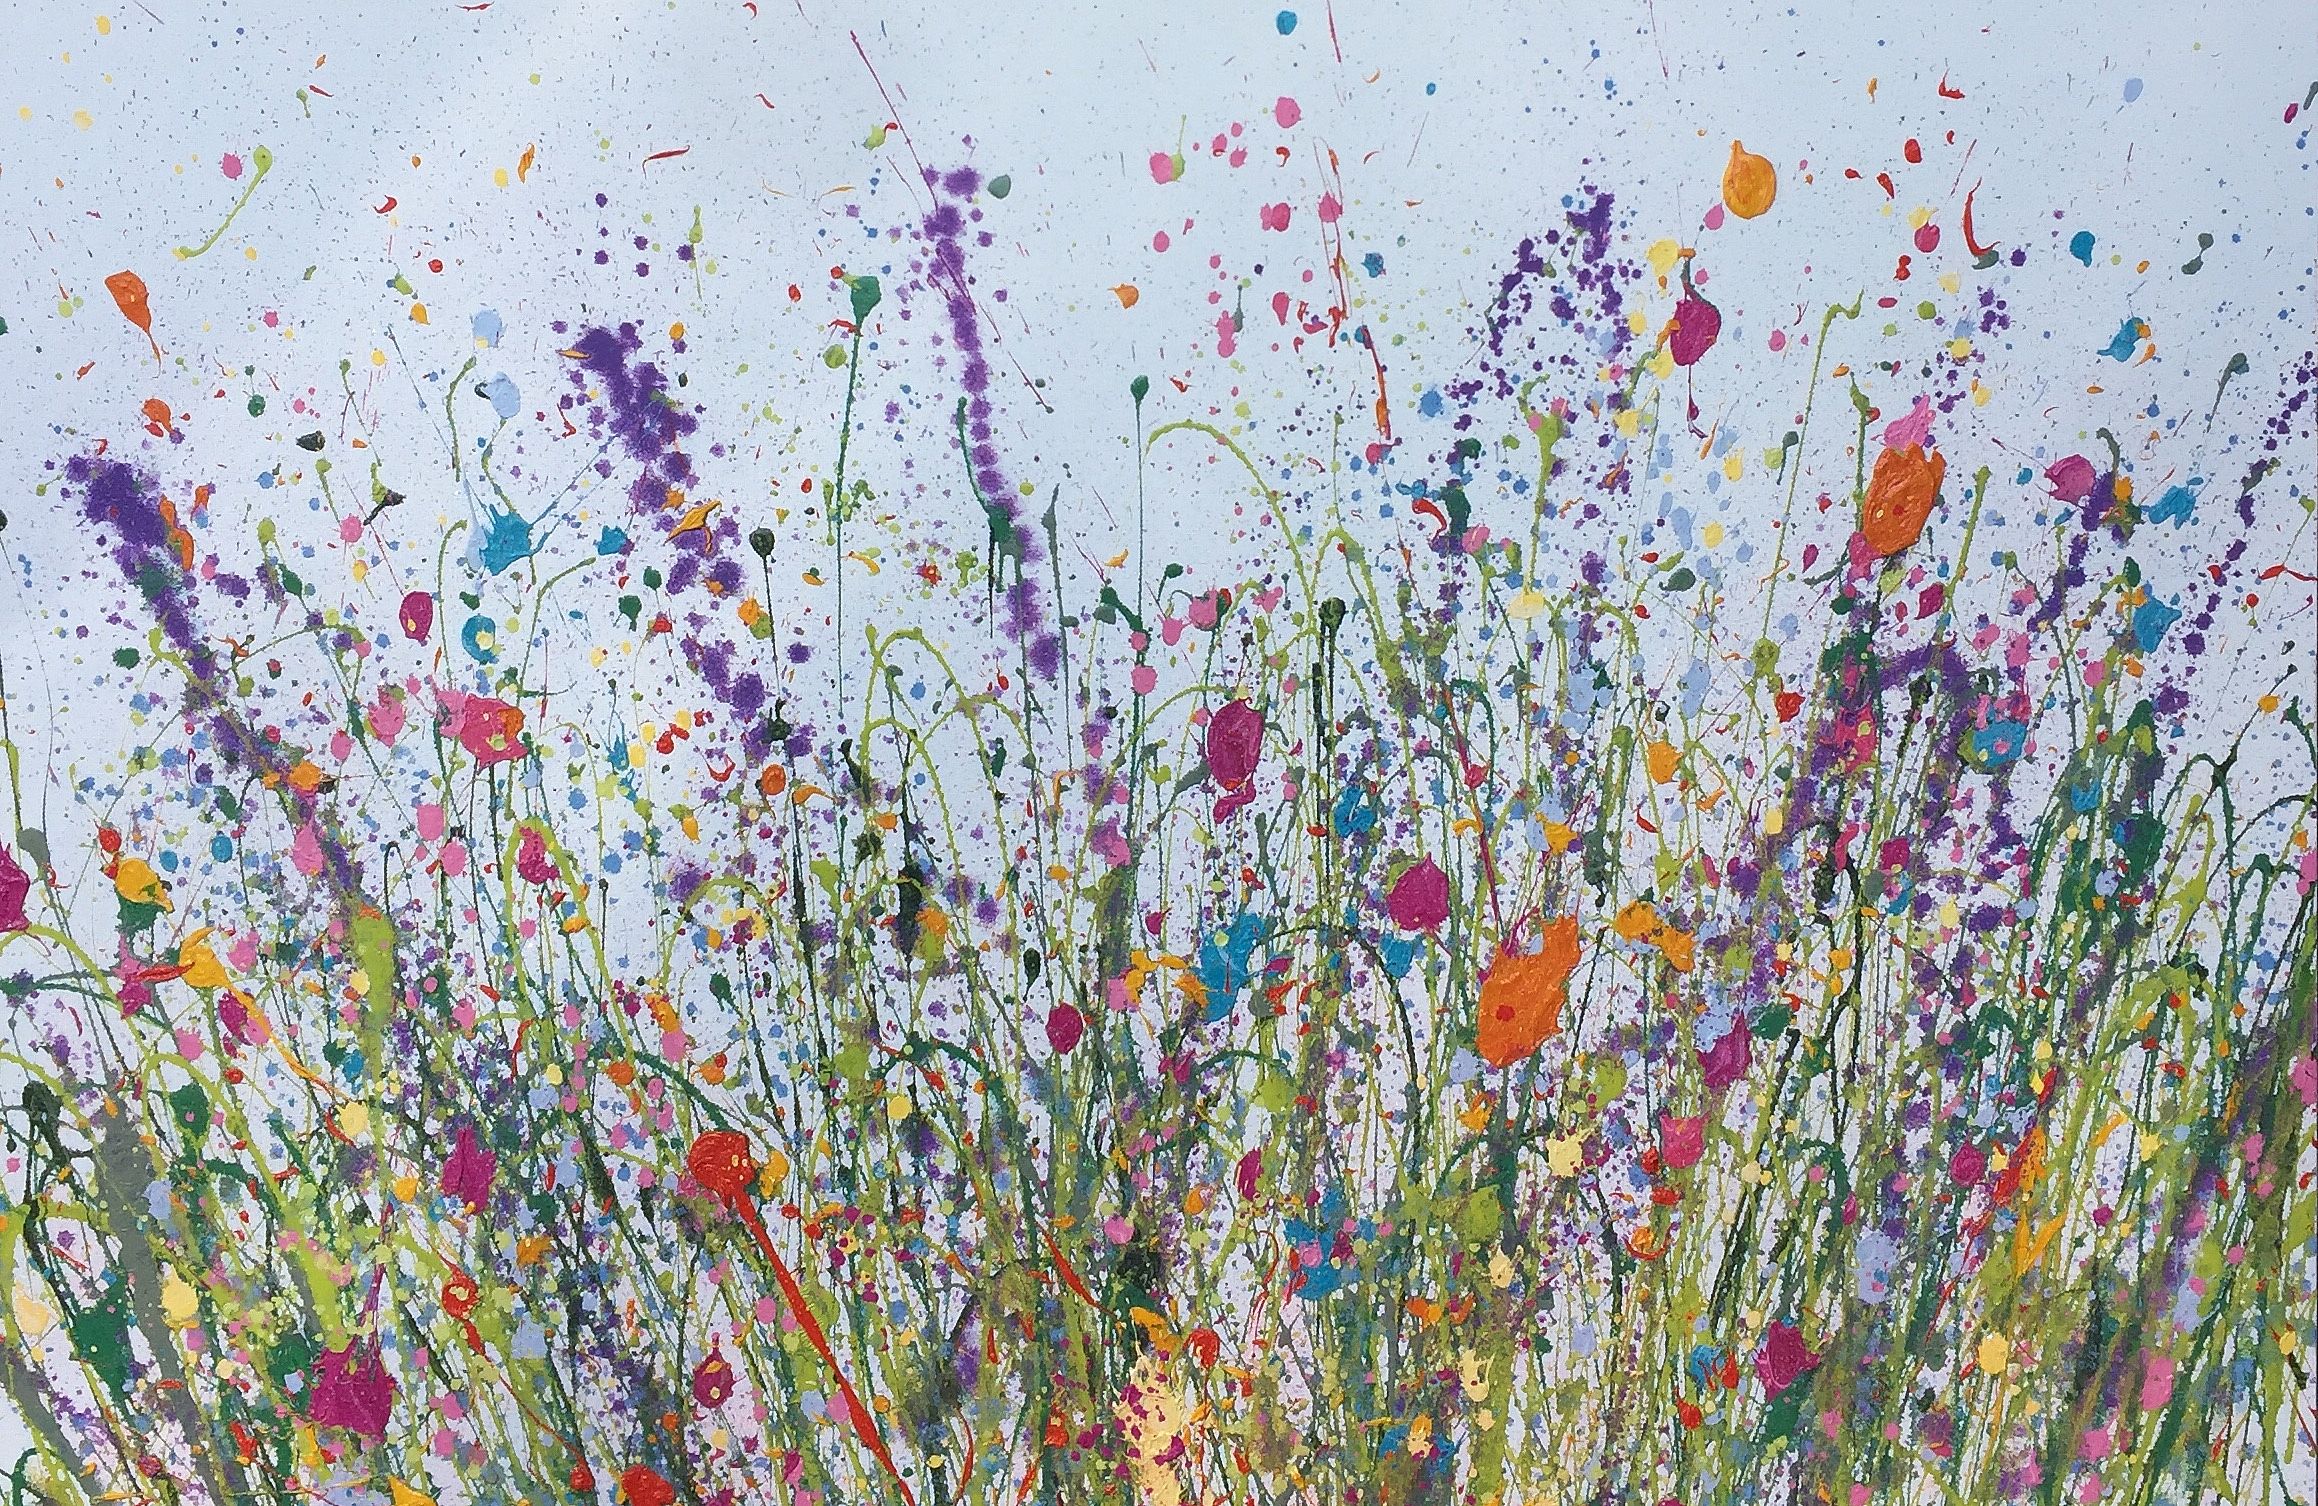 Yvonne Coomber - Your kisses are magical gateways to my soul